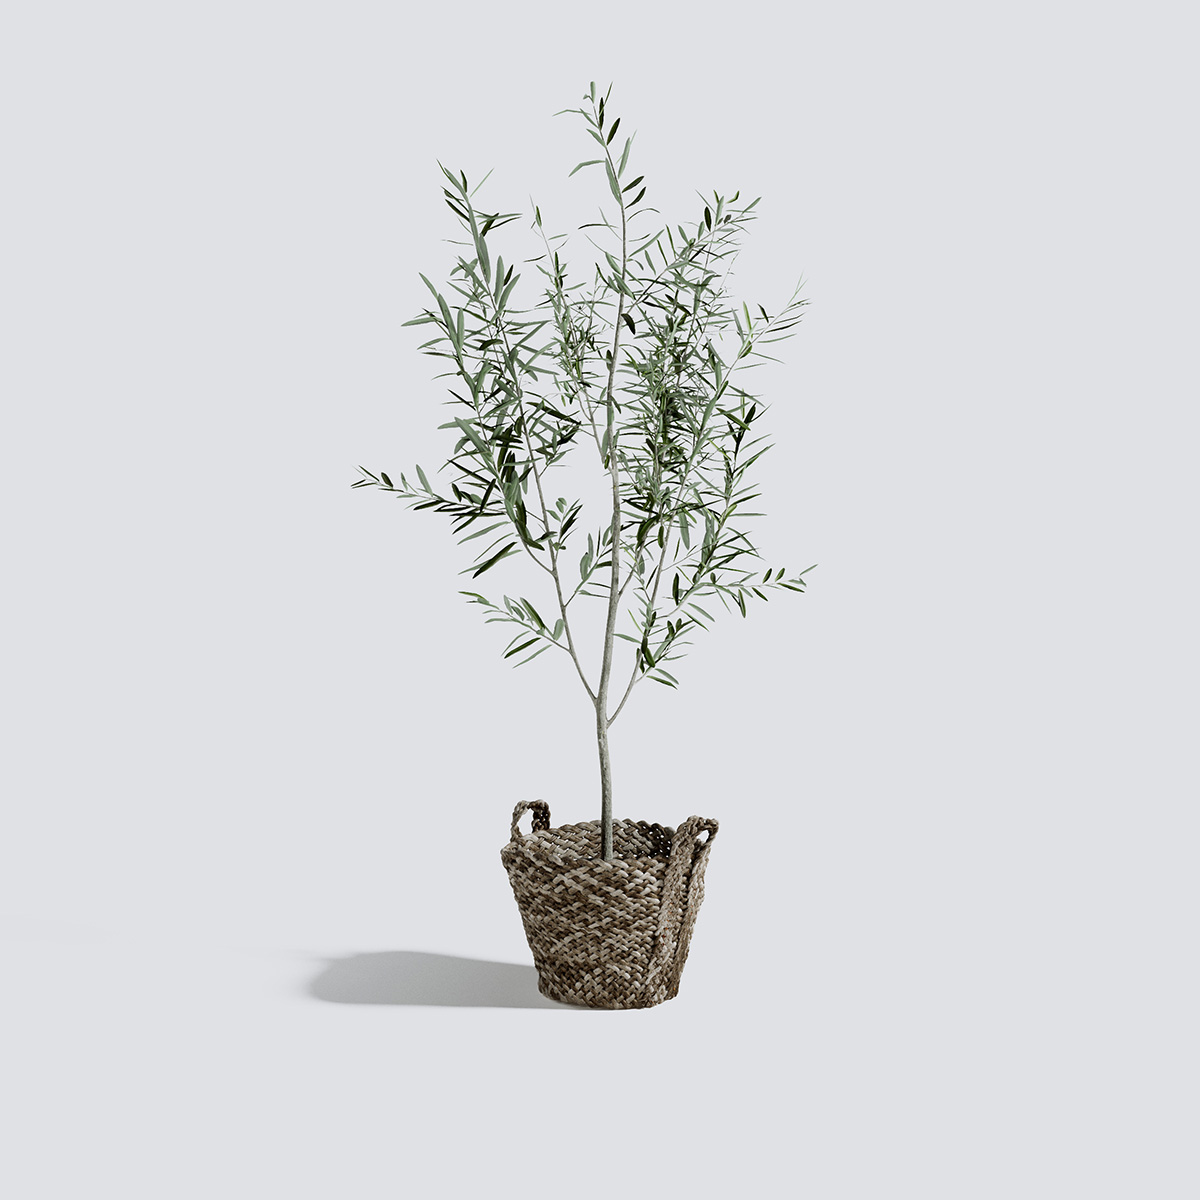 Olive Tree Triangle Form 3d Models Scenes